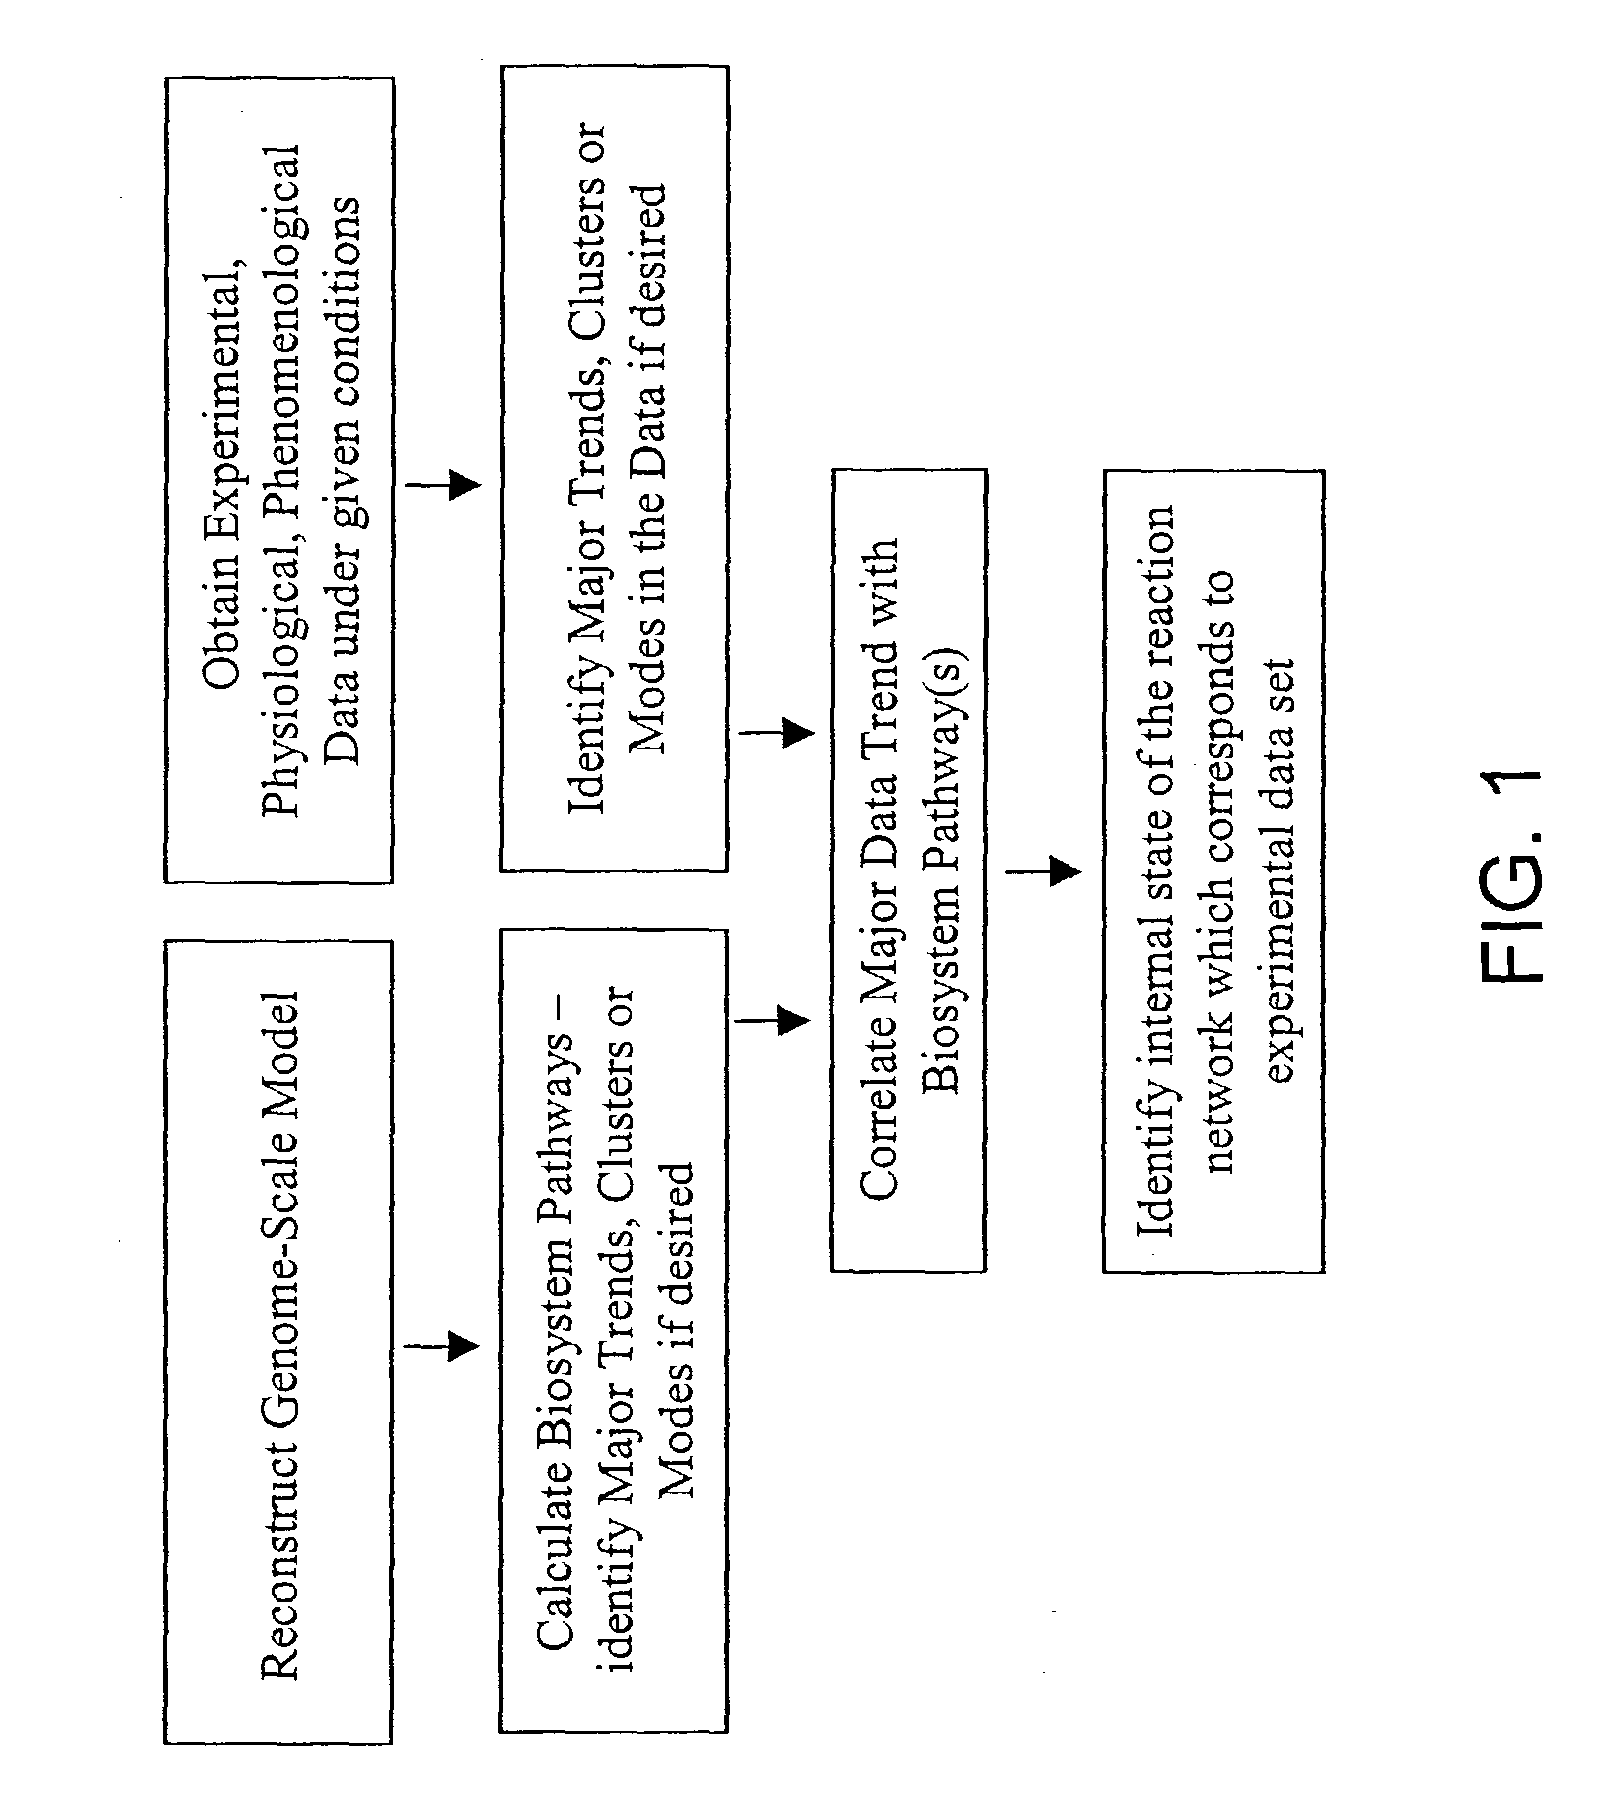 Methods and systems to identify operational reaction pathways